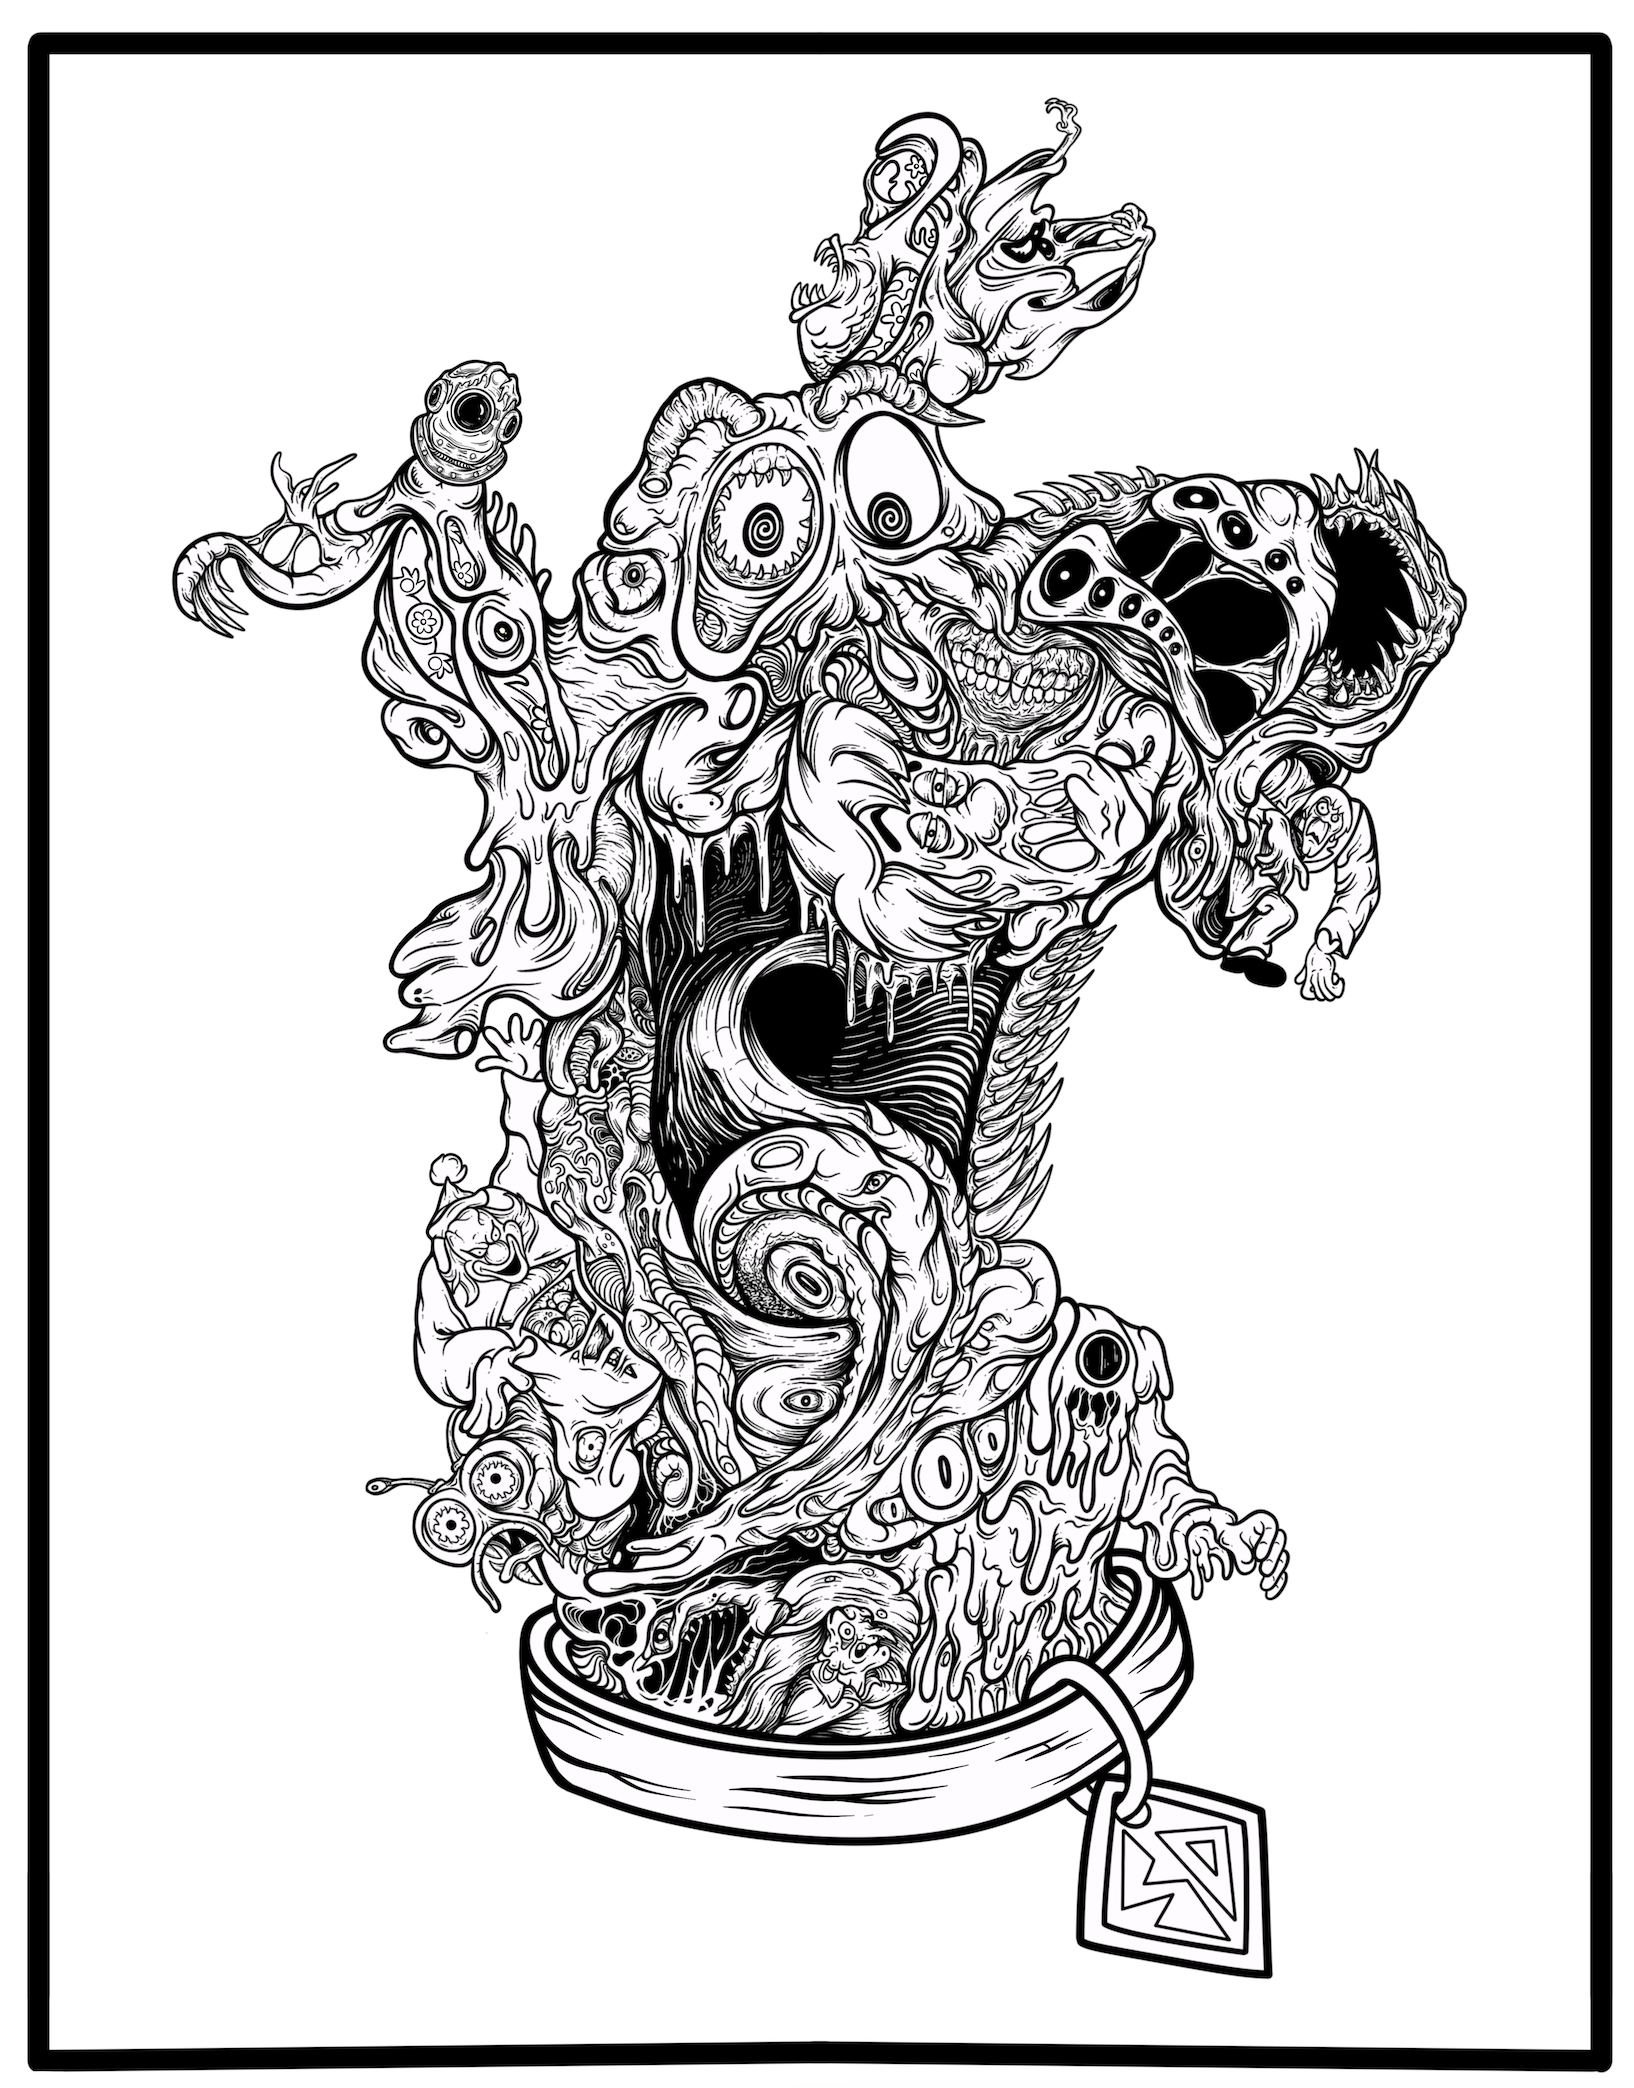 Scooby Doo Coloring Page ( New Coloring Contest)